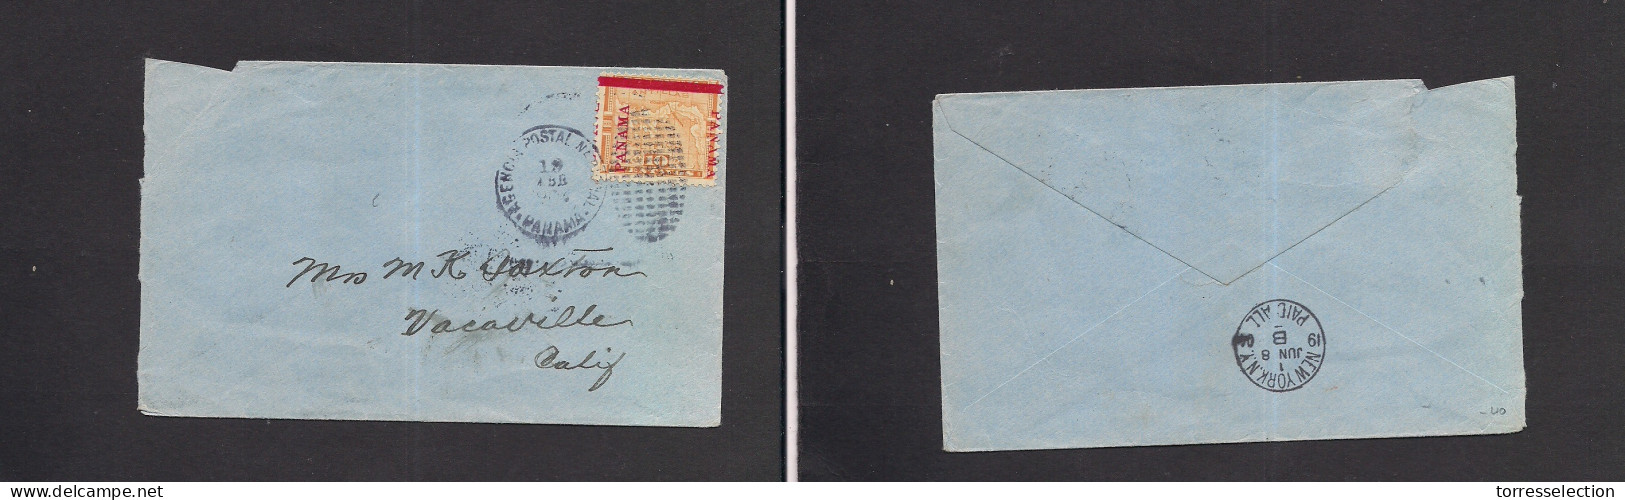 PANAMA. 1904 (19 April) APN - USA, CA, Vacaville Red Ovptd Issue Fkd Env. XSALE. - Panama